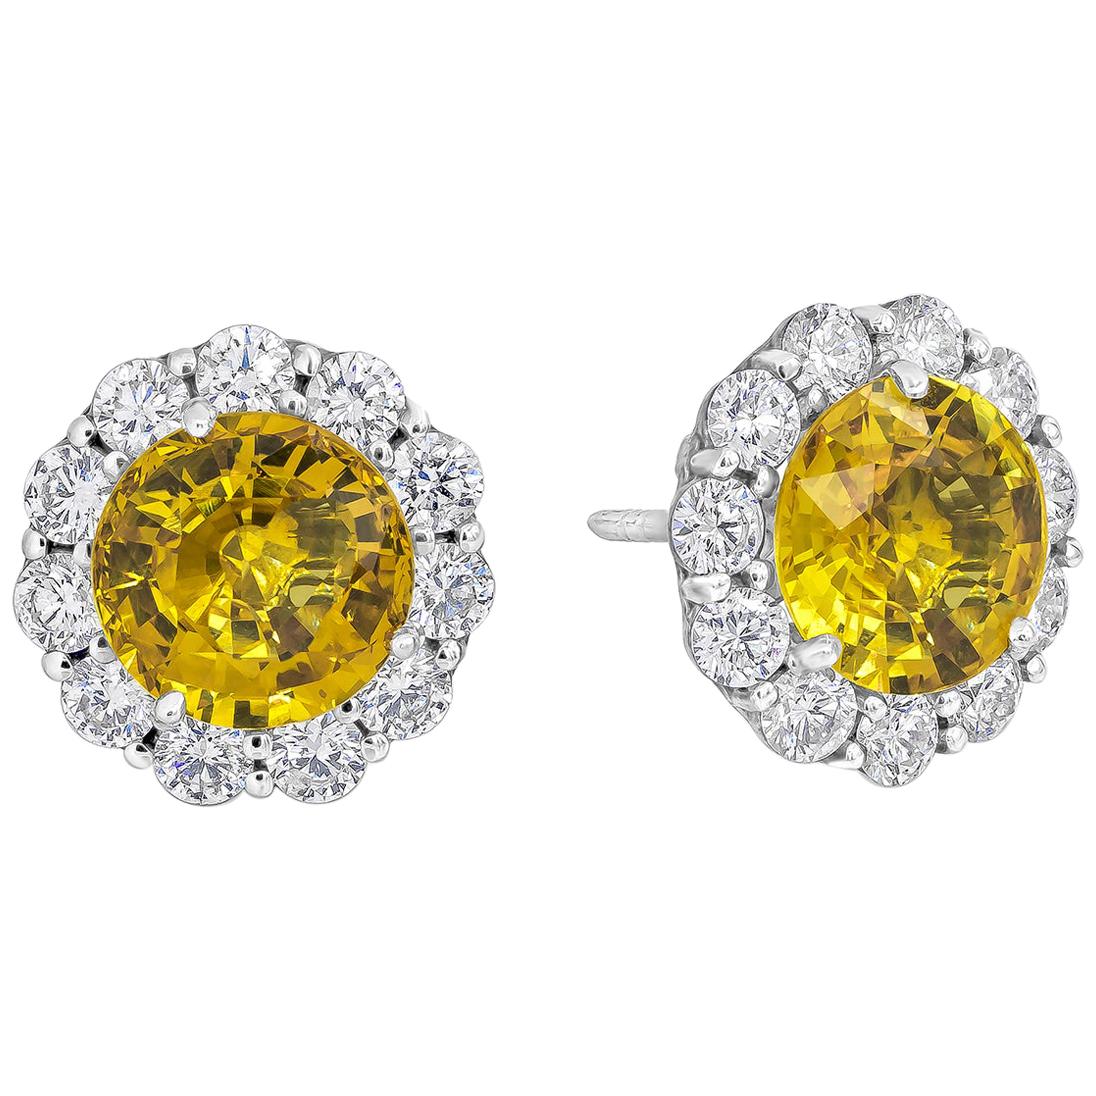 6.94 Carats Total Round Cut Yellow Sapphire and Diamond Halo Stud Earrings